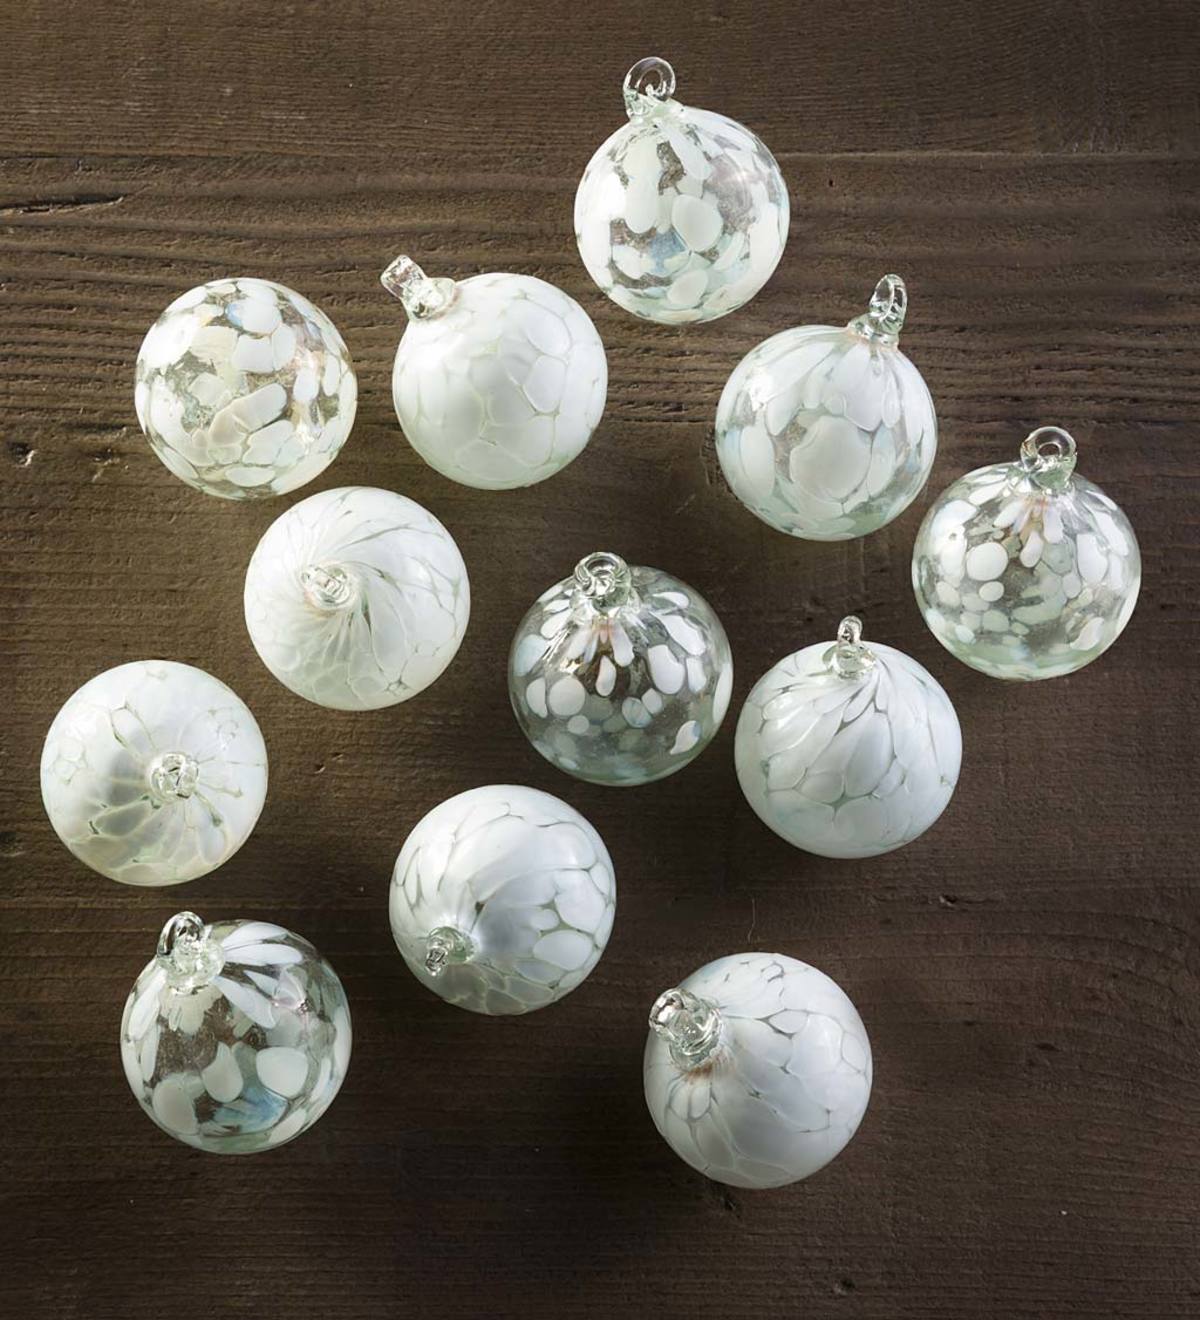 Laguna Recycled Glass Ornaments S/12 